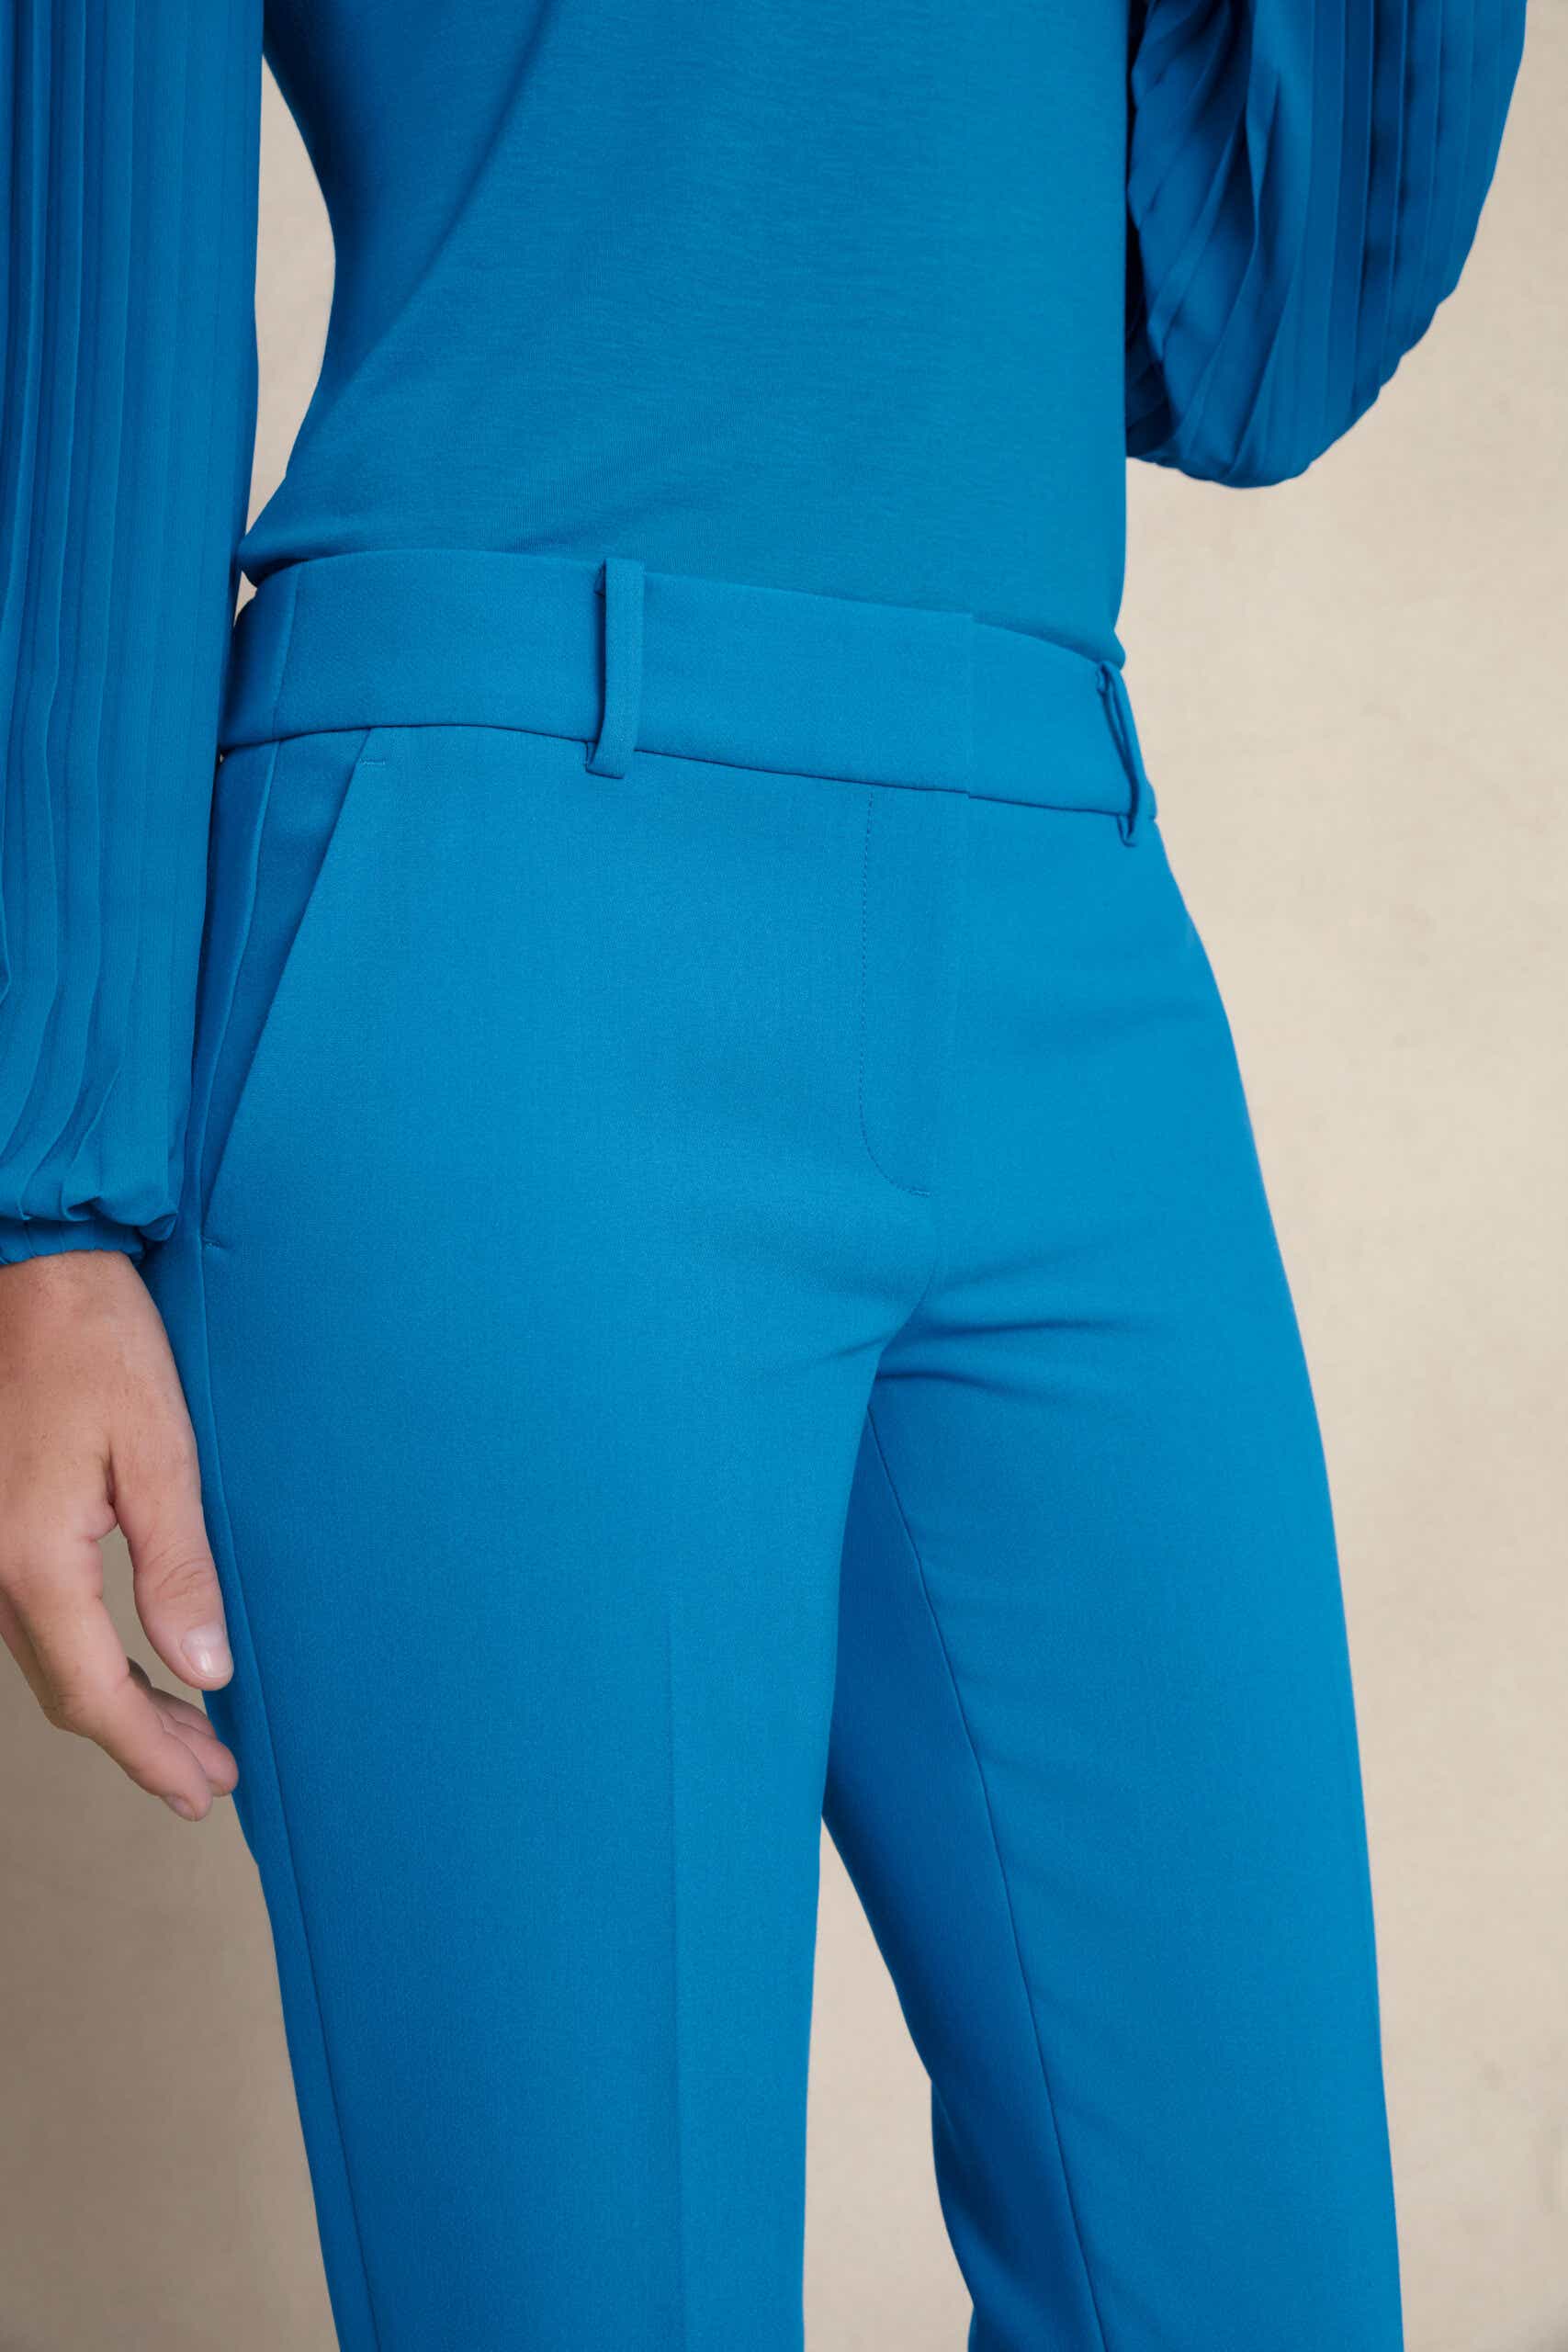 Close-up image of Talbots Hampshire pants in blue